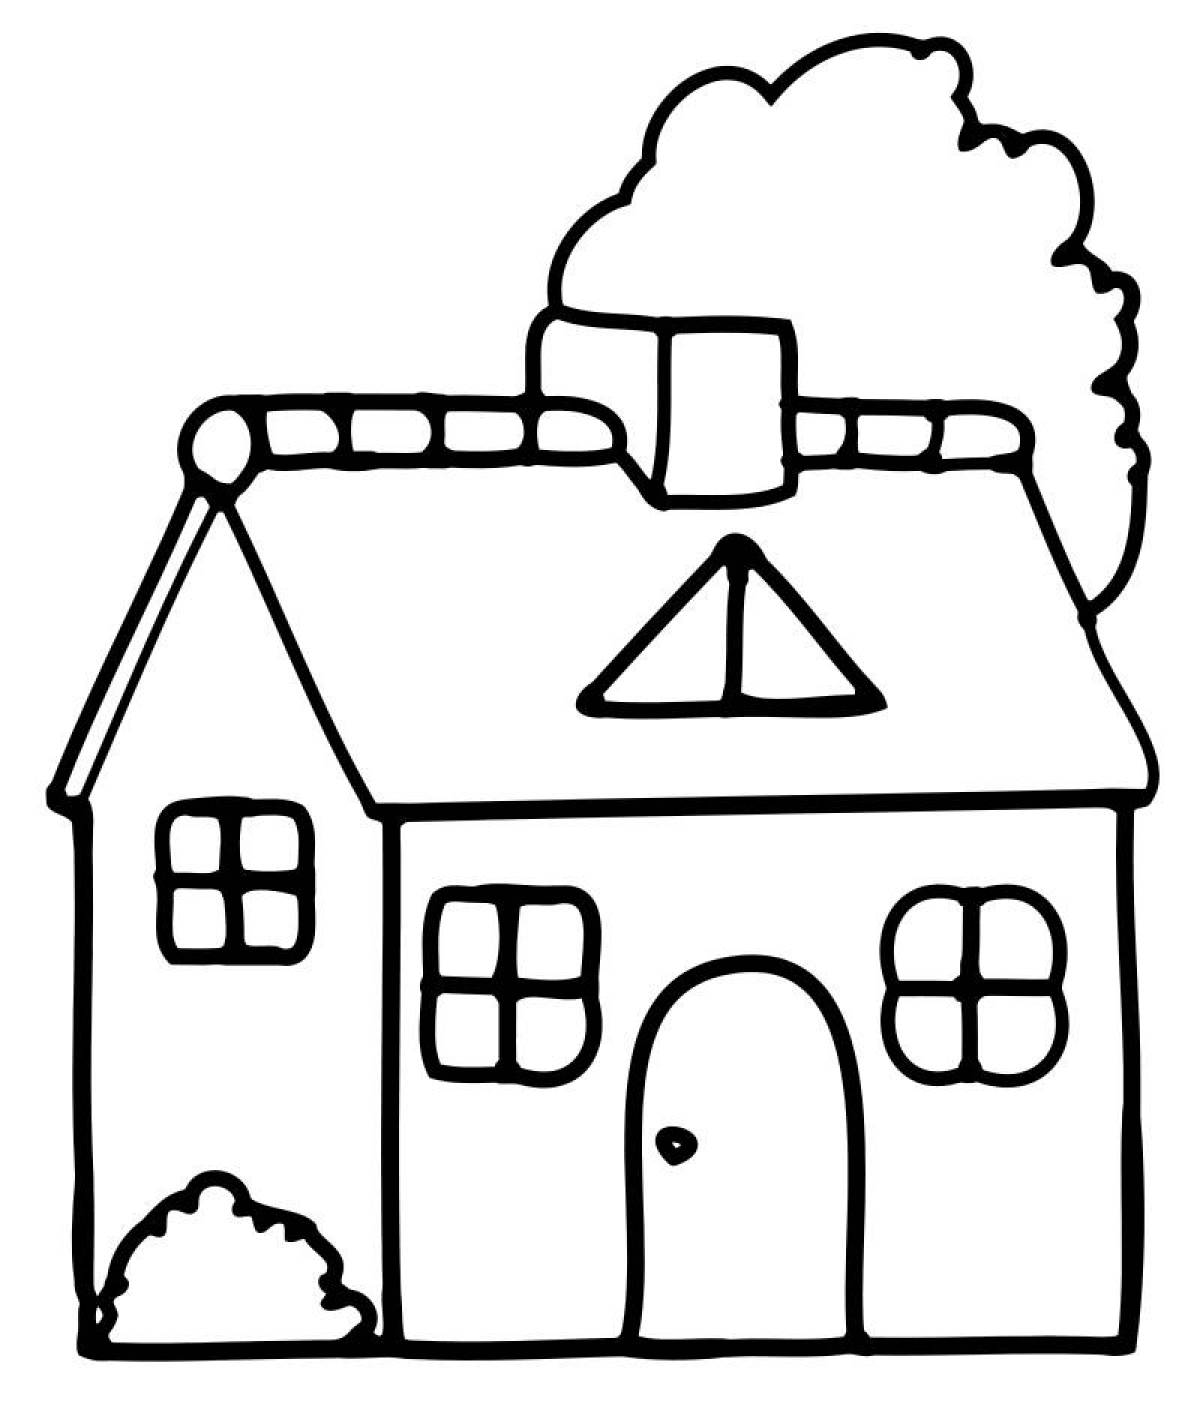 Incredible house coloring book for kids